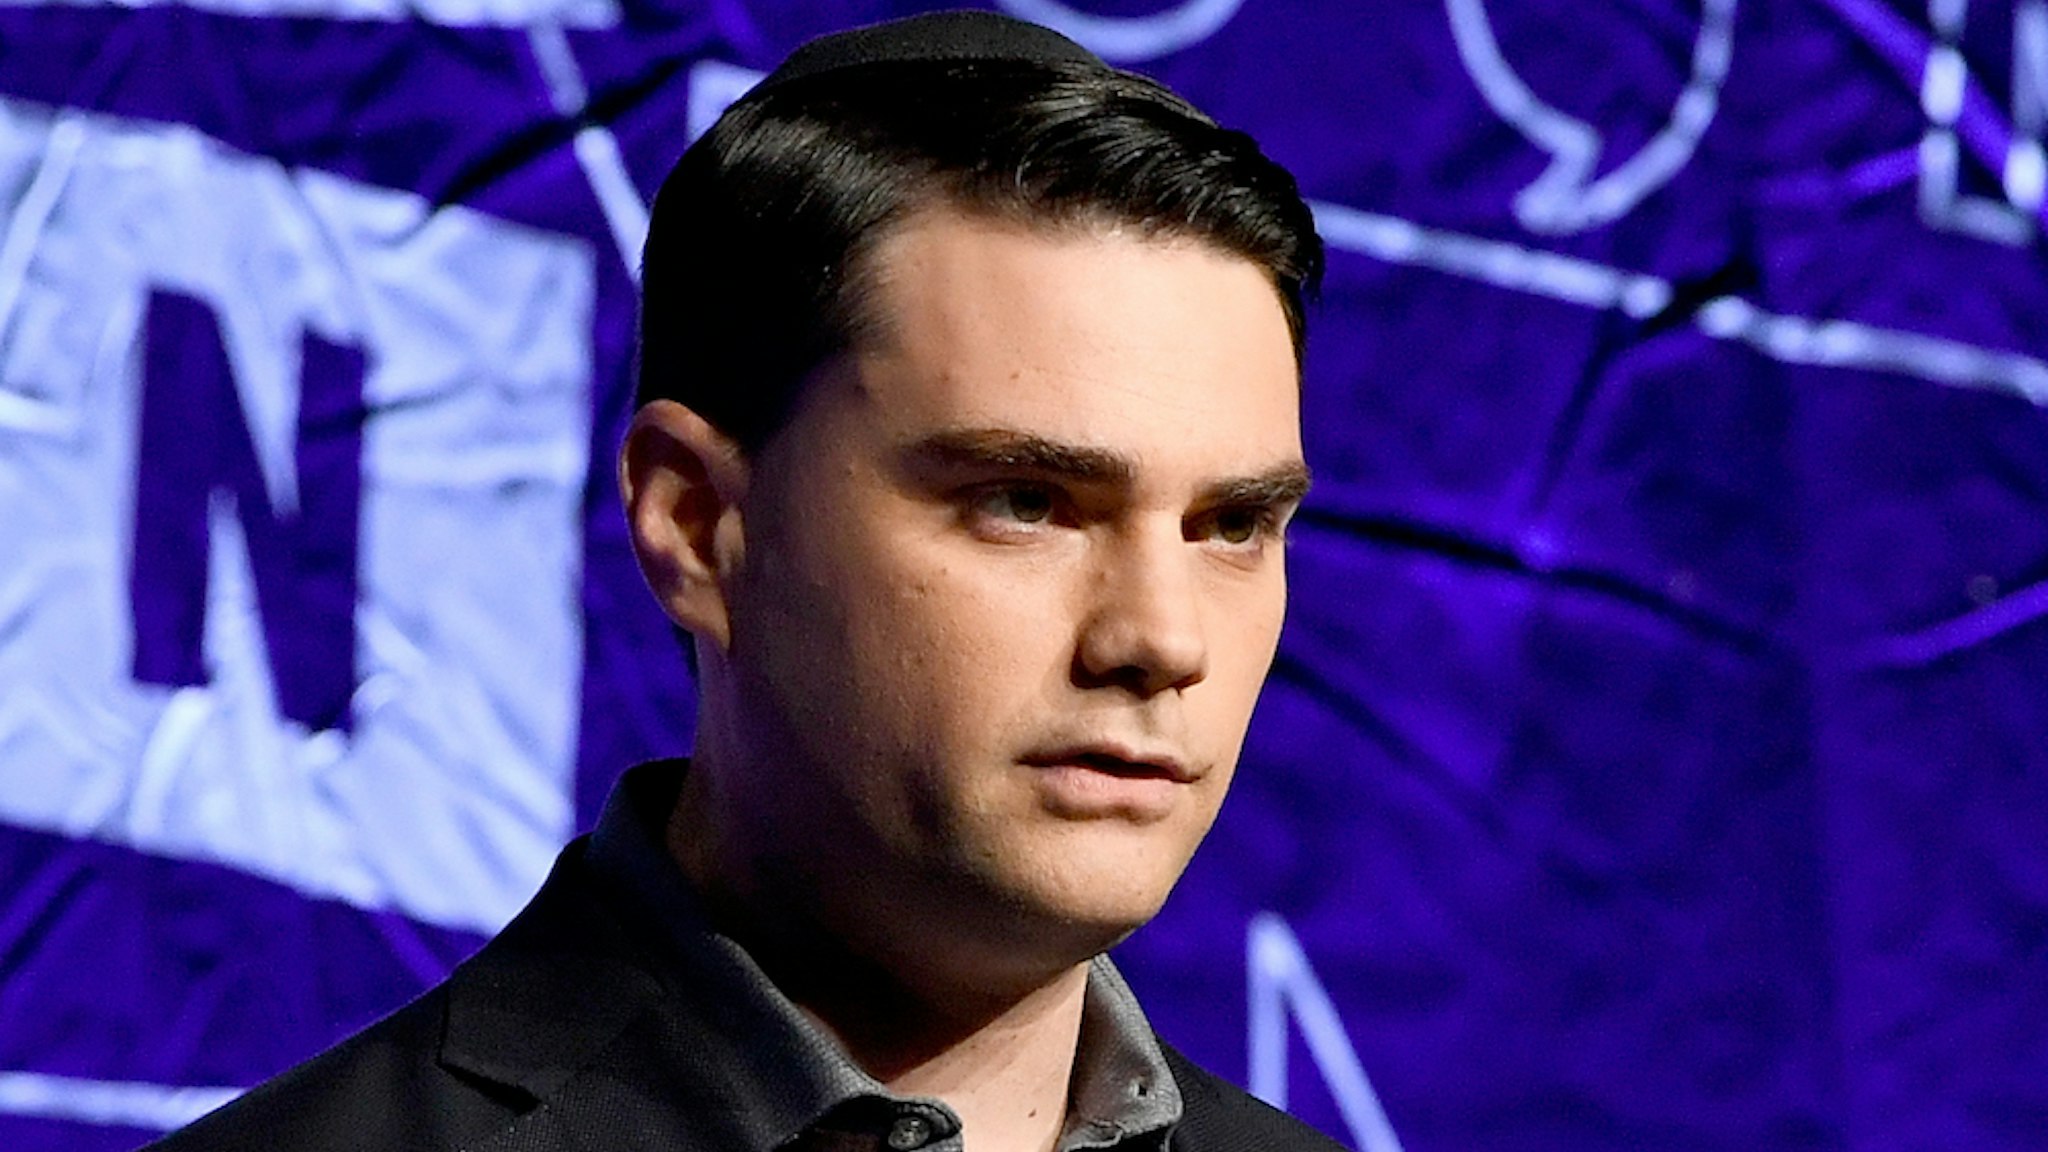 Ben Shapiro speaks onstage at Politicon 2018 at Los Angeles Convention Center on October 21, 2018 in Los Angeles, California. (Photo by Michael S. Schwartz/Getty Images)